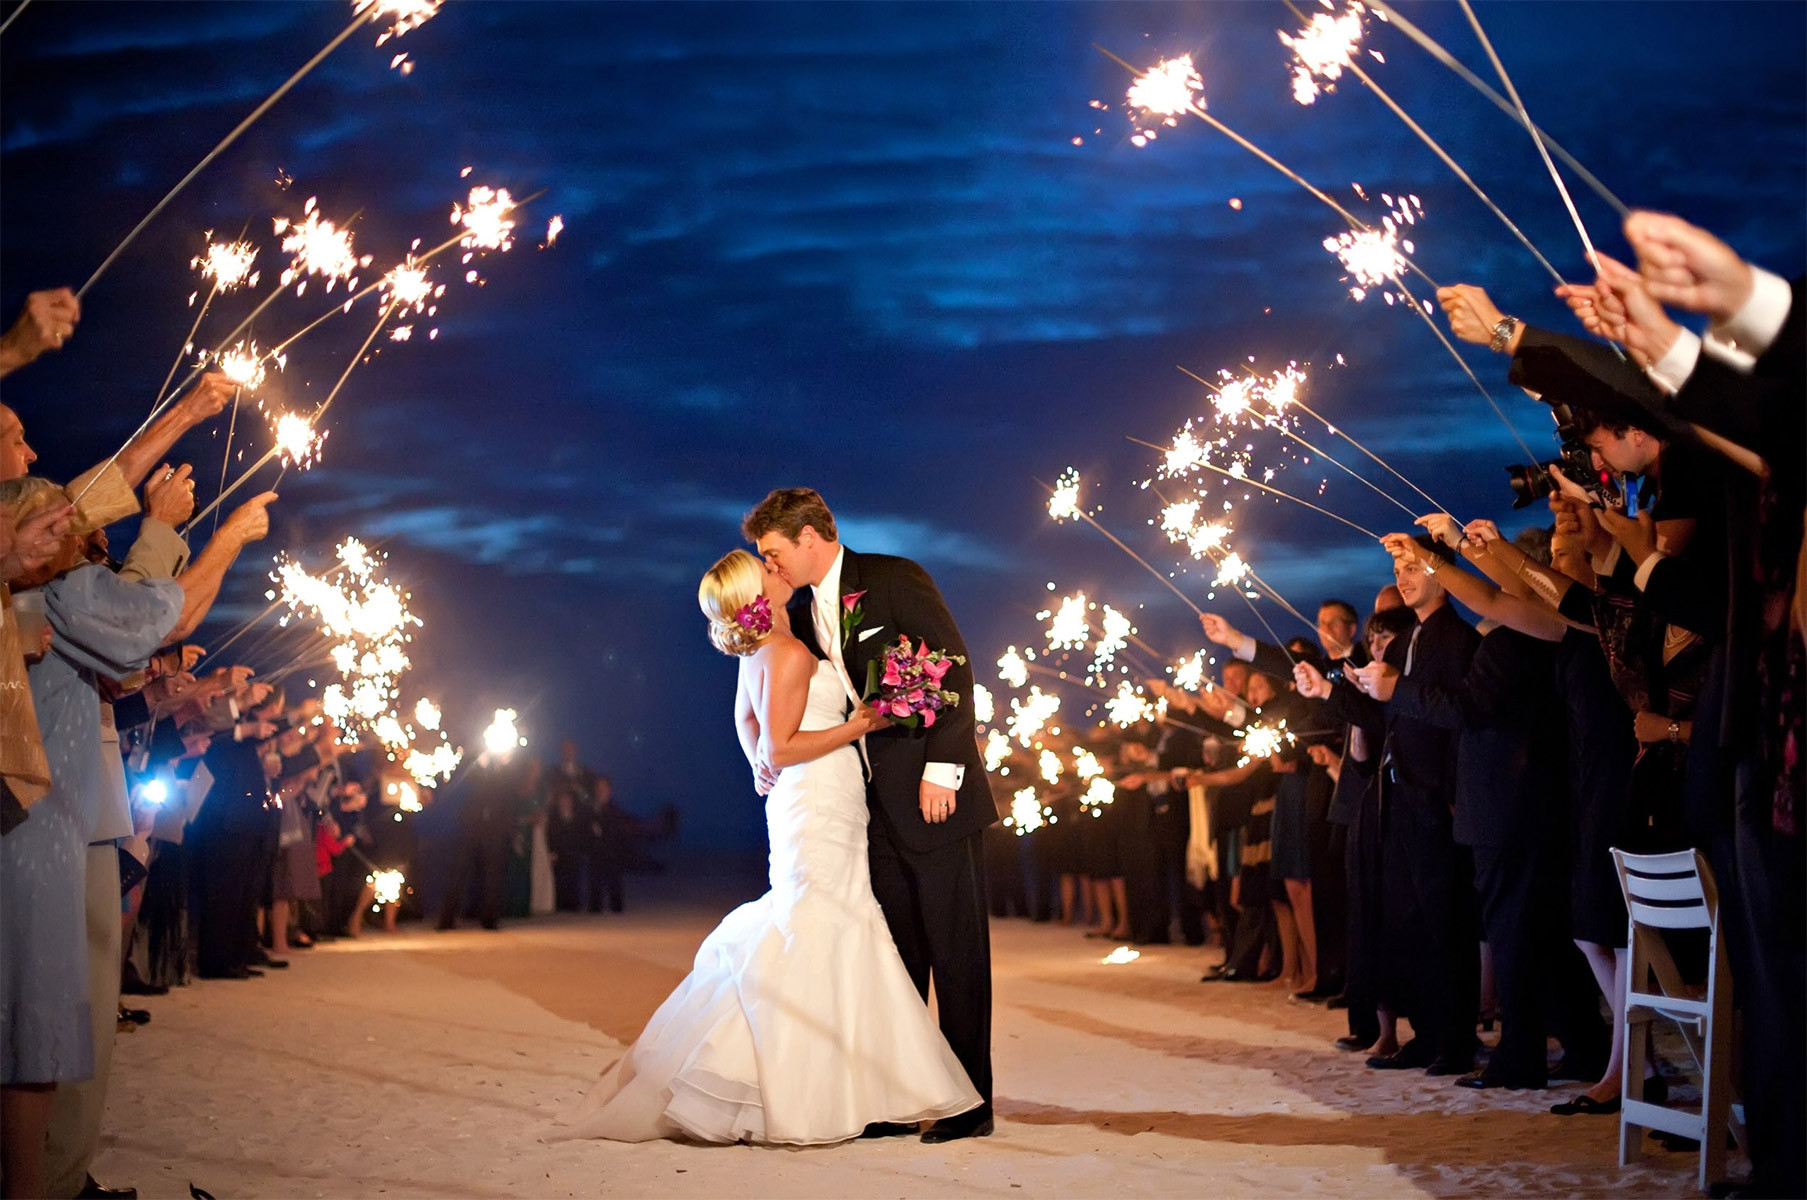 Wedding Sparkler Pictures
 A Guide to Using Sparklers for Your Wedding Exit Send f